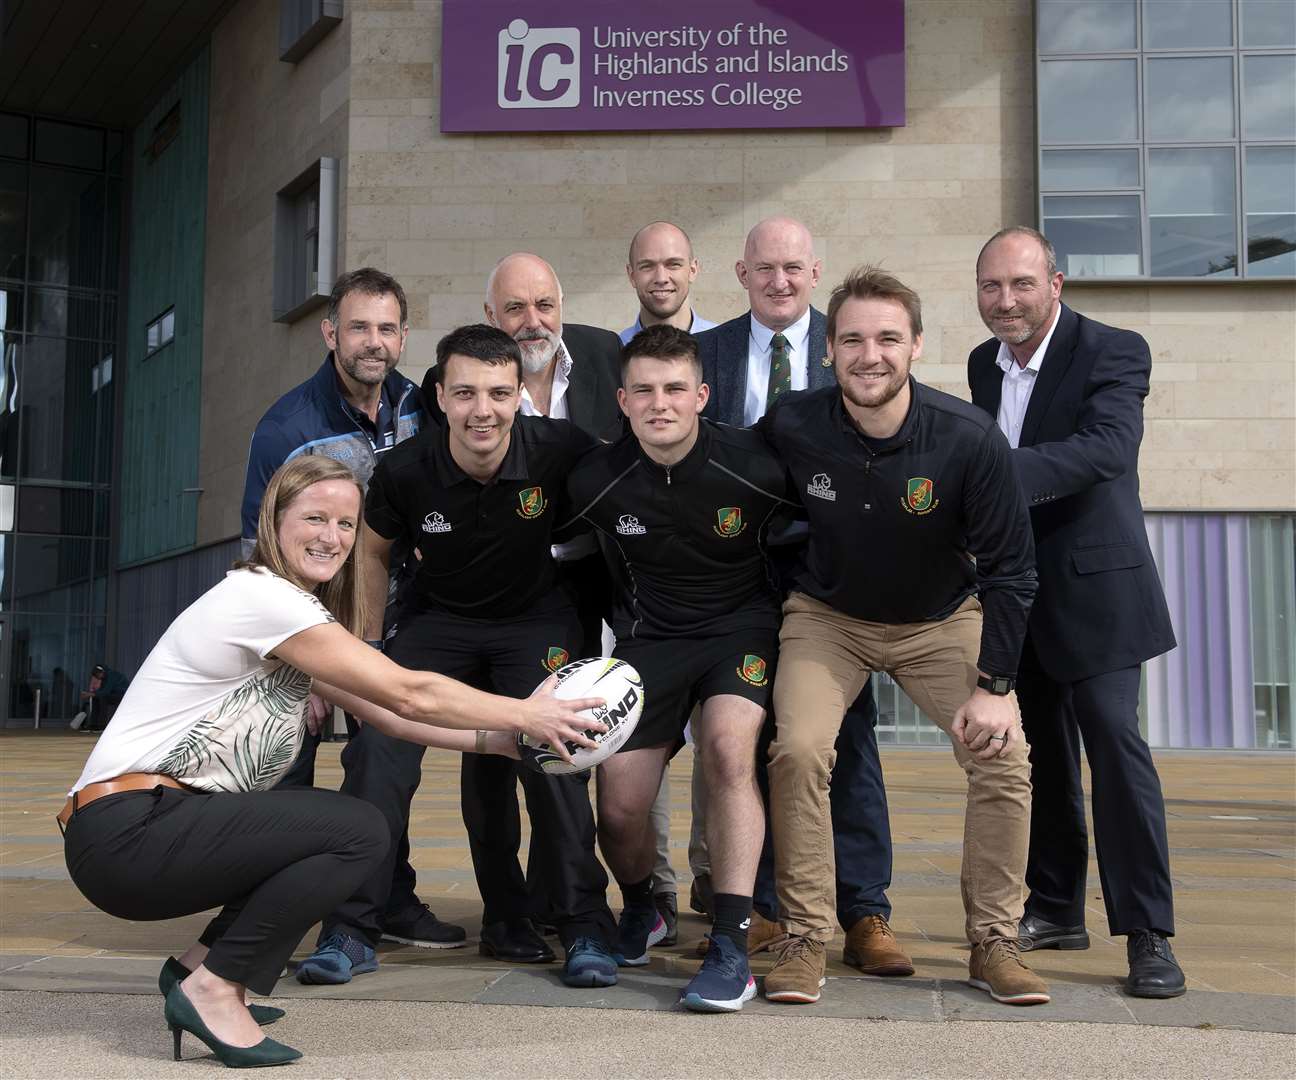 Inverness College UHI and Highland Rugby Club have signed a formal partnership, which will see us collaborate on a range of projects including education, research, squad development, coaching.